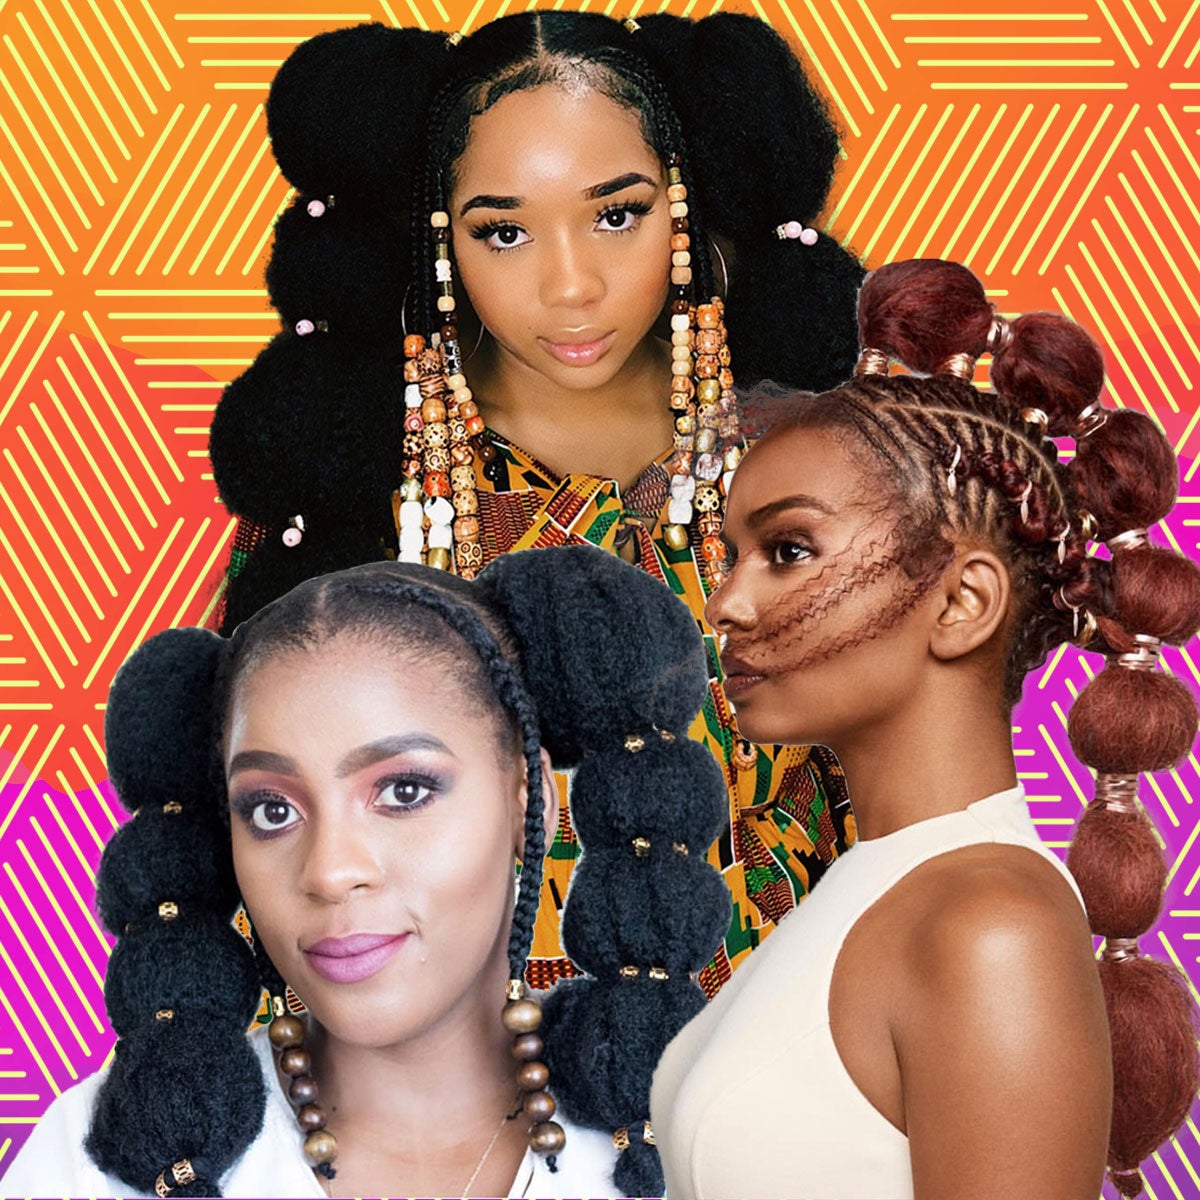 Puffballs Are The Latest Protective Style Taking Over The Internet